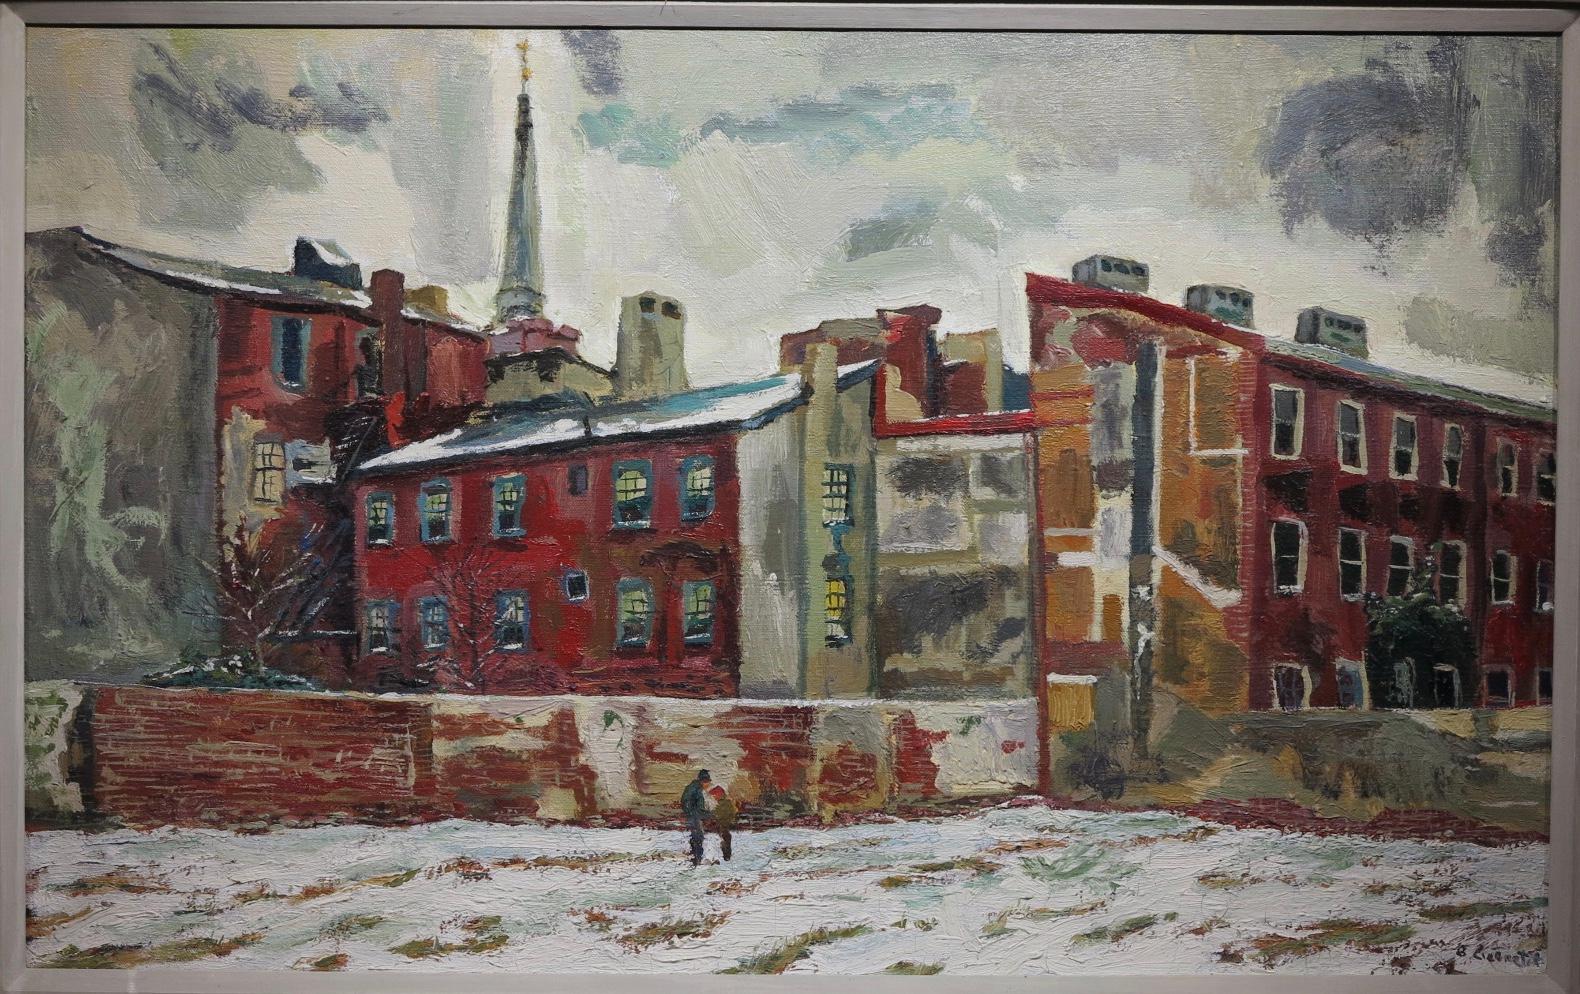 Benjamin Eisenstat (1915-2001). Society Hill, c.1950. Oil on canvas, 20 x 32 inches; 27 x 39 inched framed. Signed lower right. Signed and titled en verso. Excellent condition with minor paint cracking in lower area. The scene depicts the Society